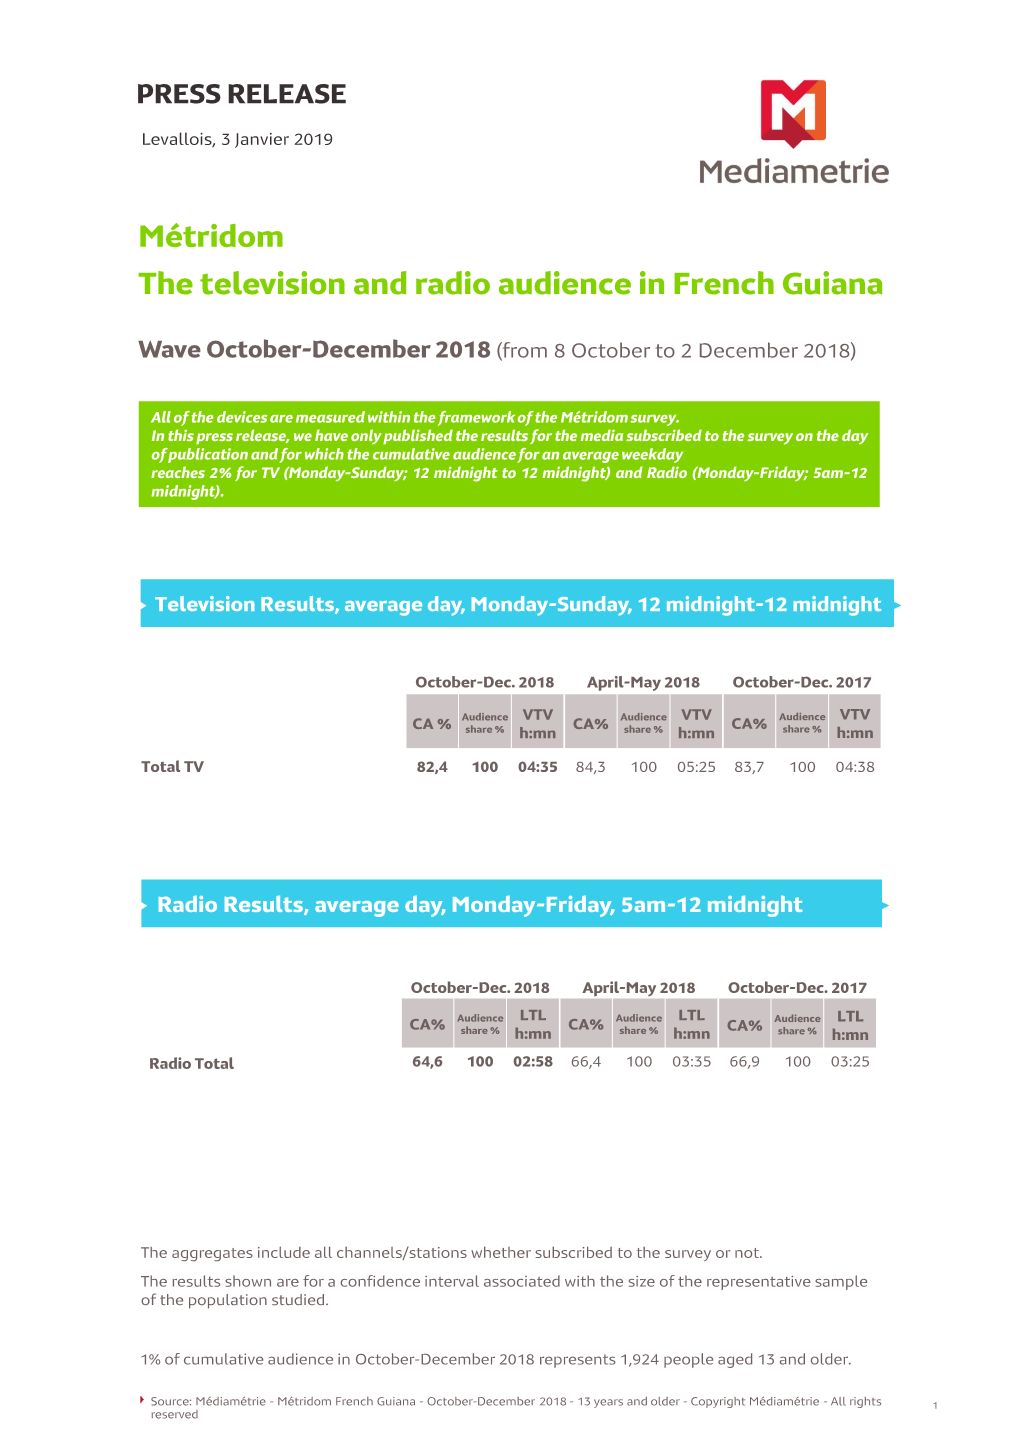 RADIO RESULTS in French Guiana